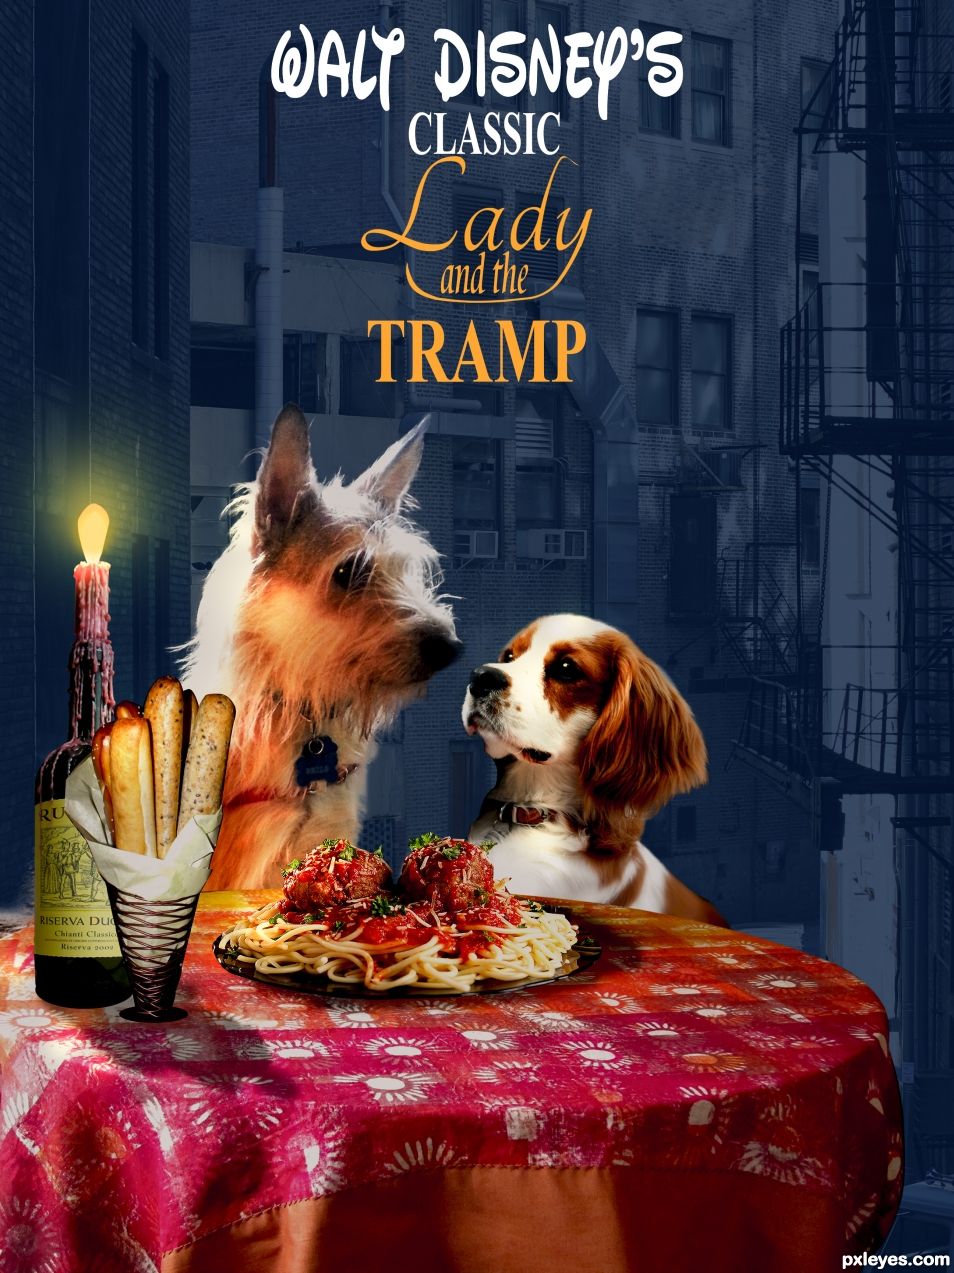 Creation of Lady and the Tramp: Final Result